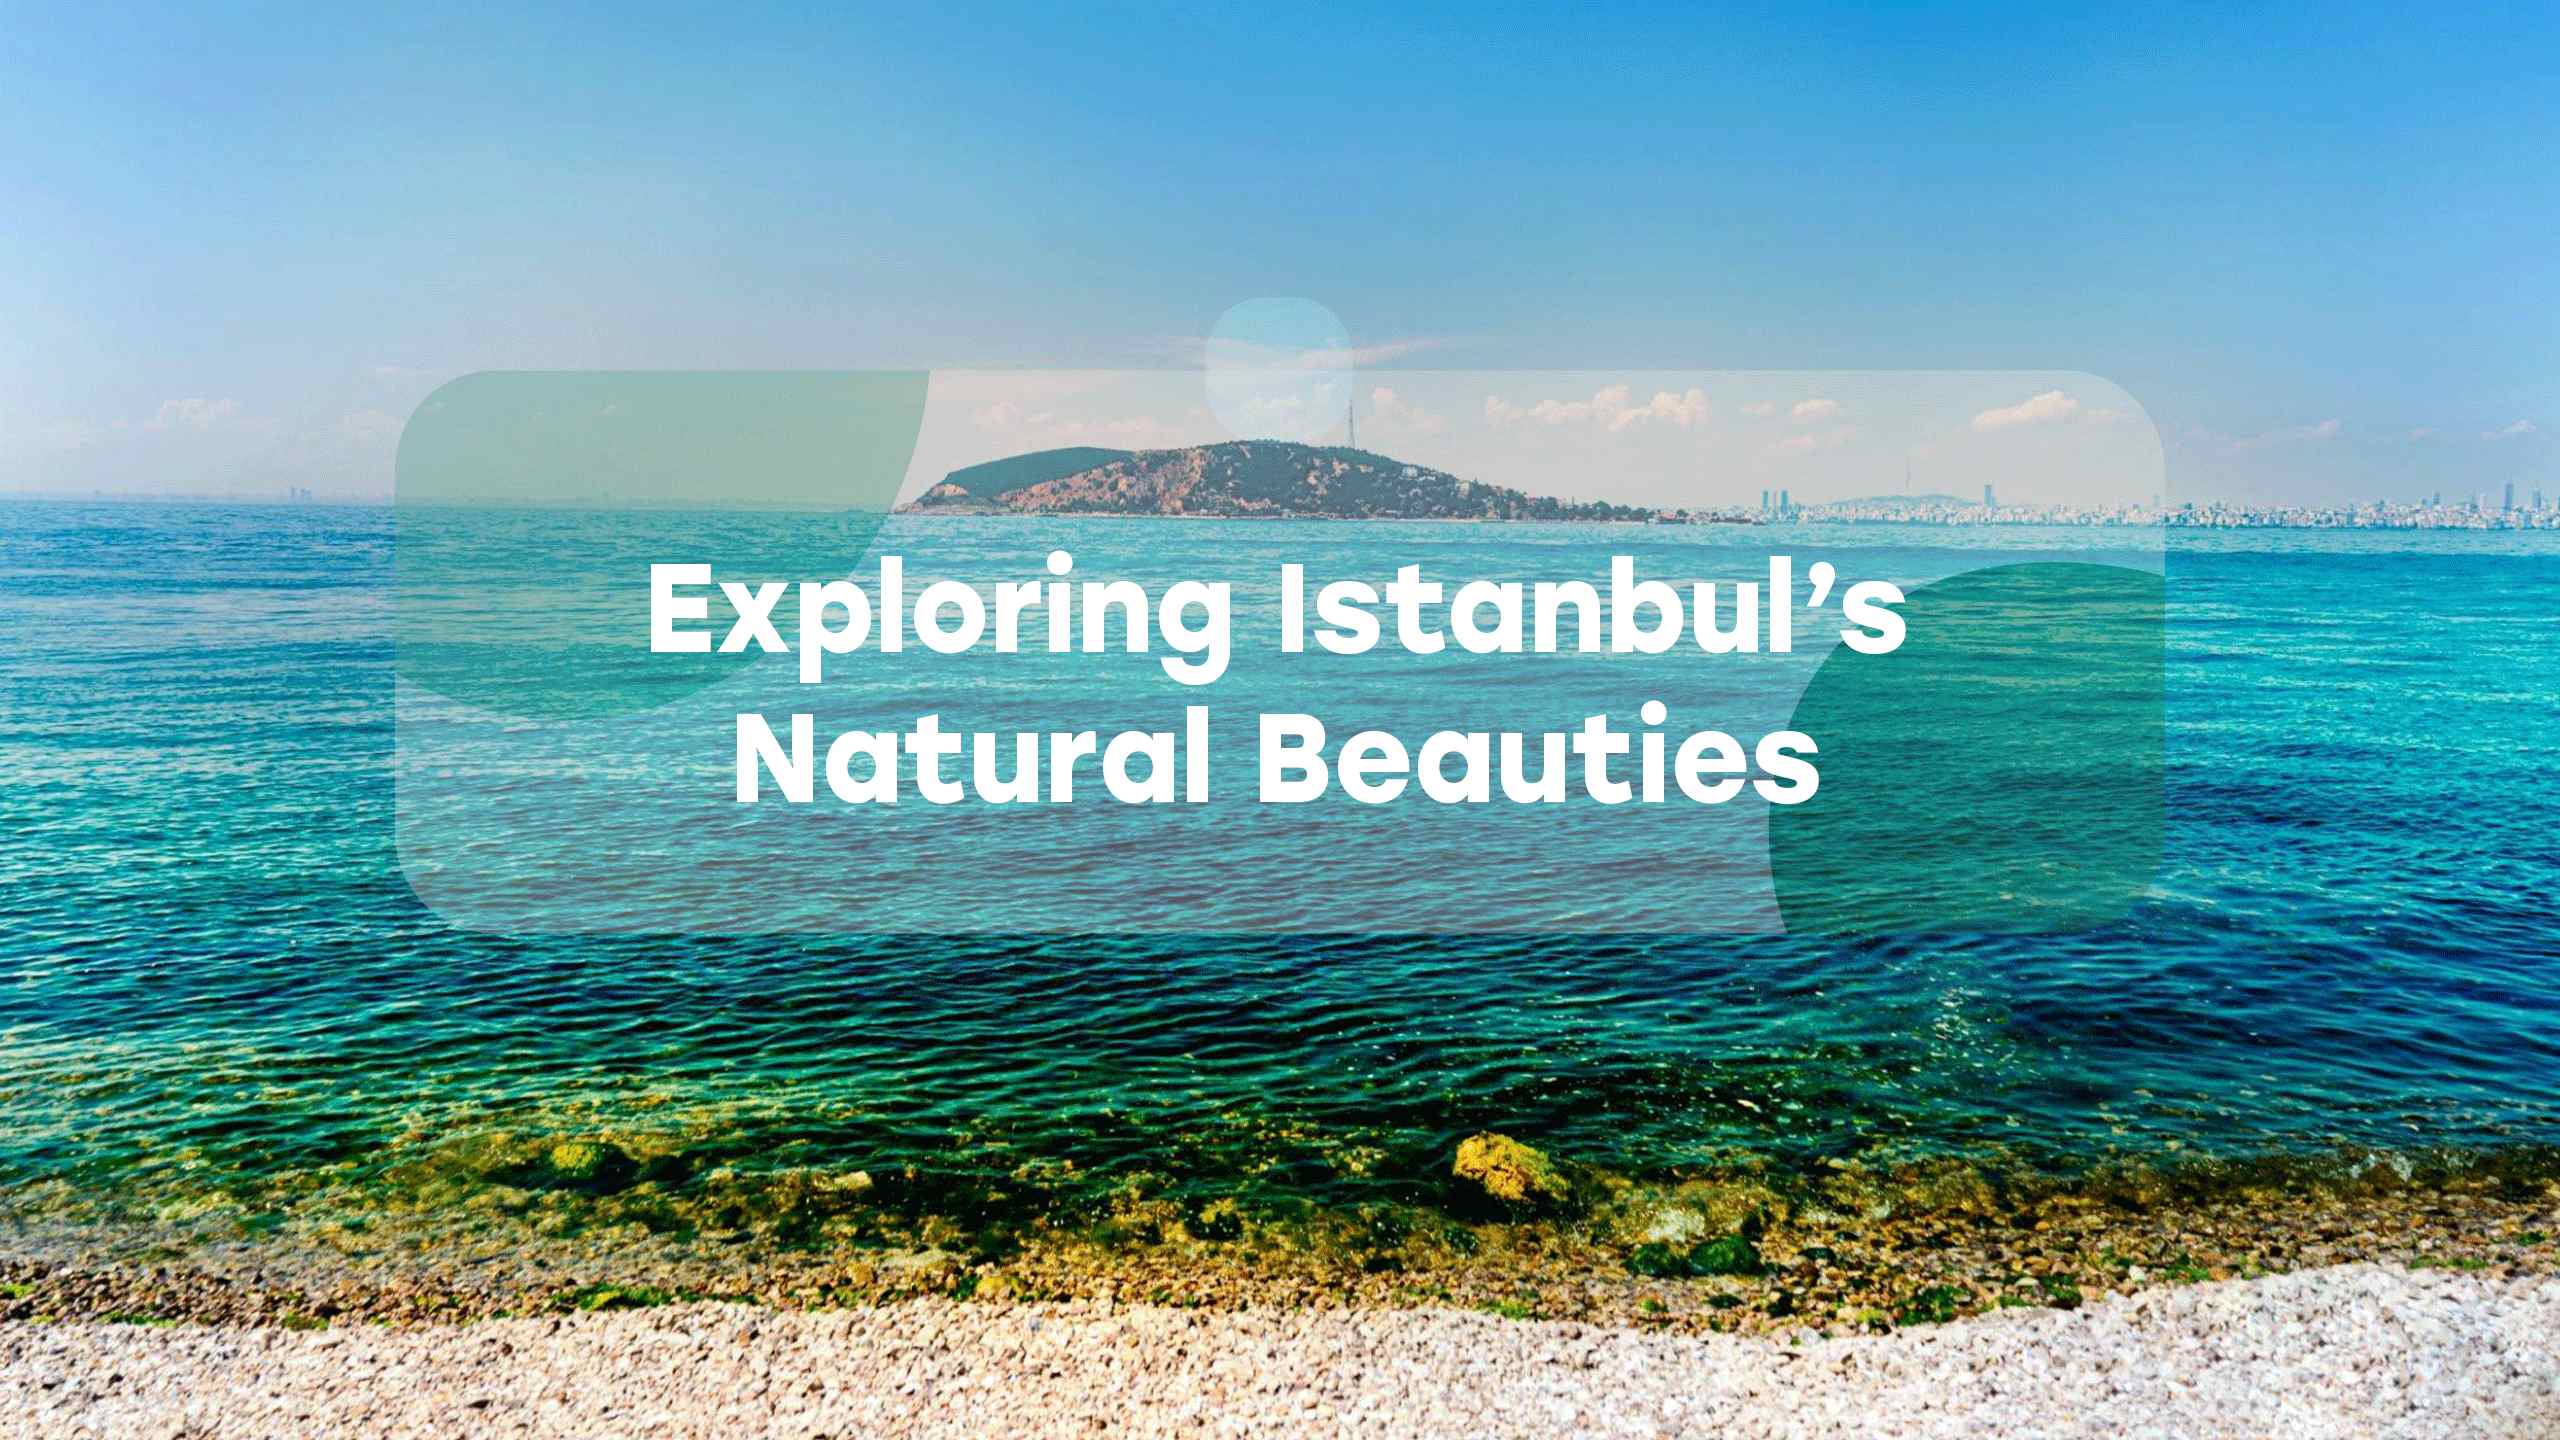 7 Natural Beauties from Istanbul Everytours